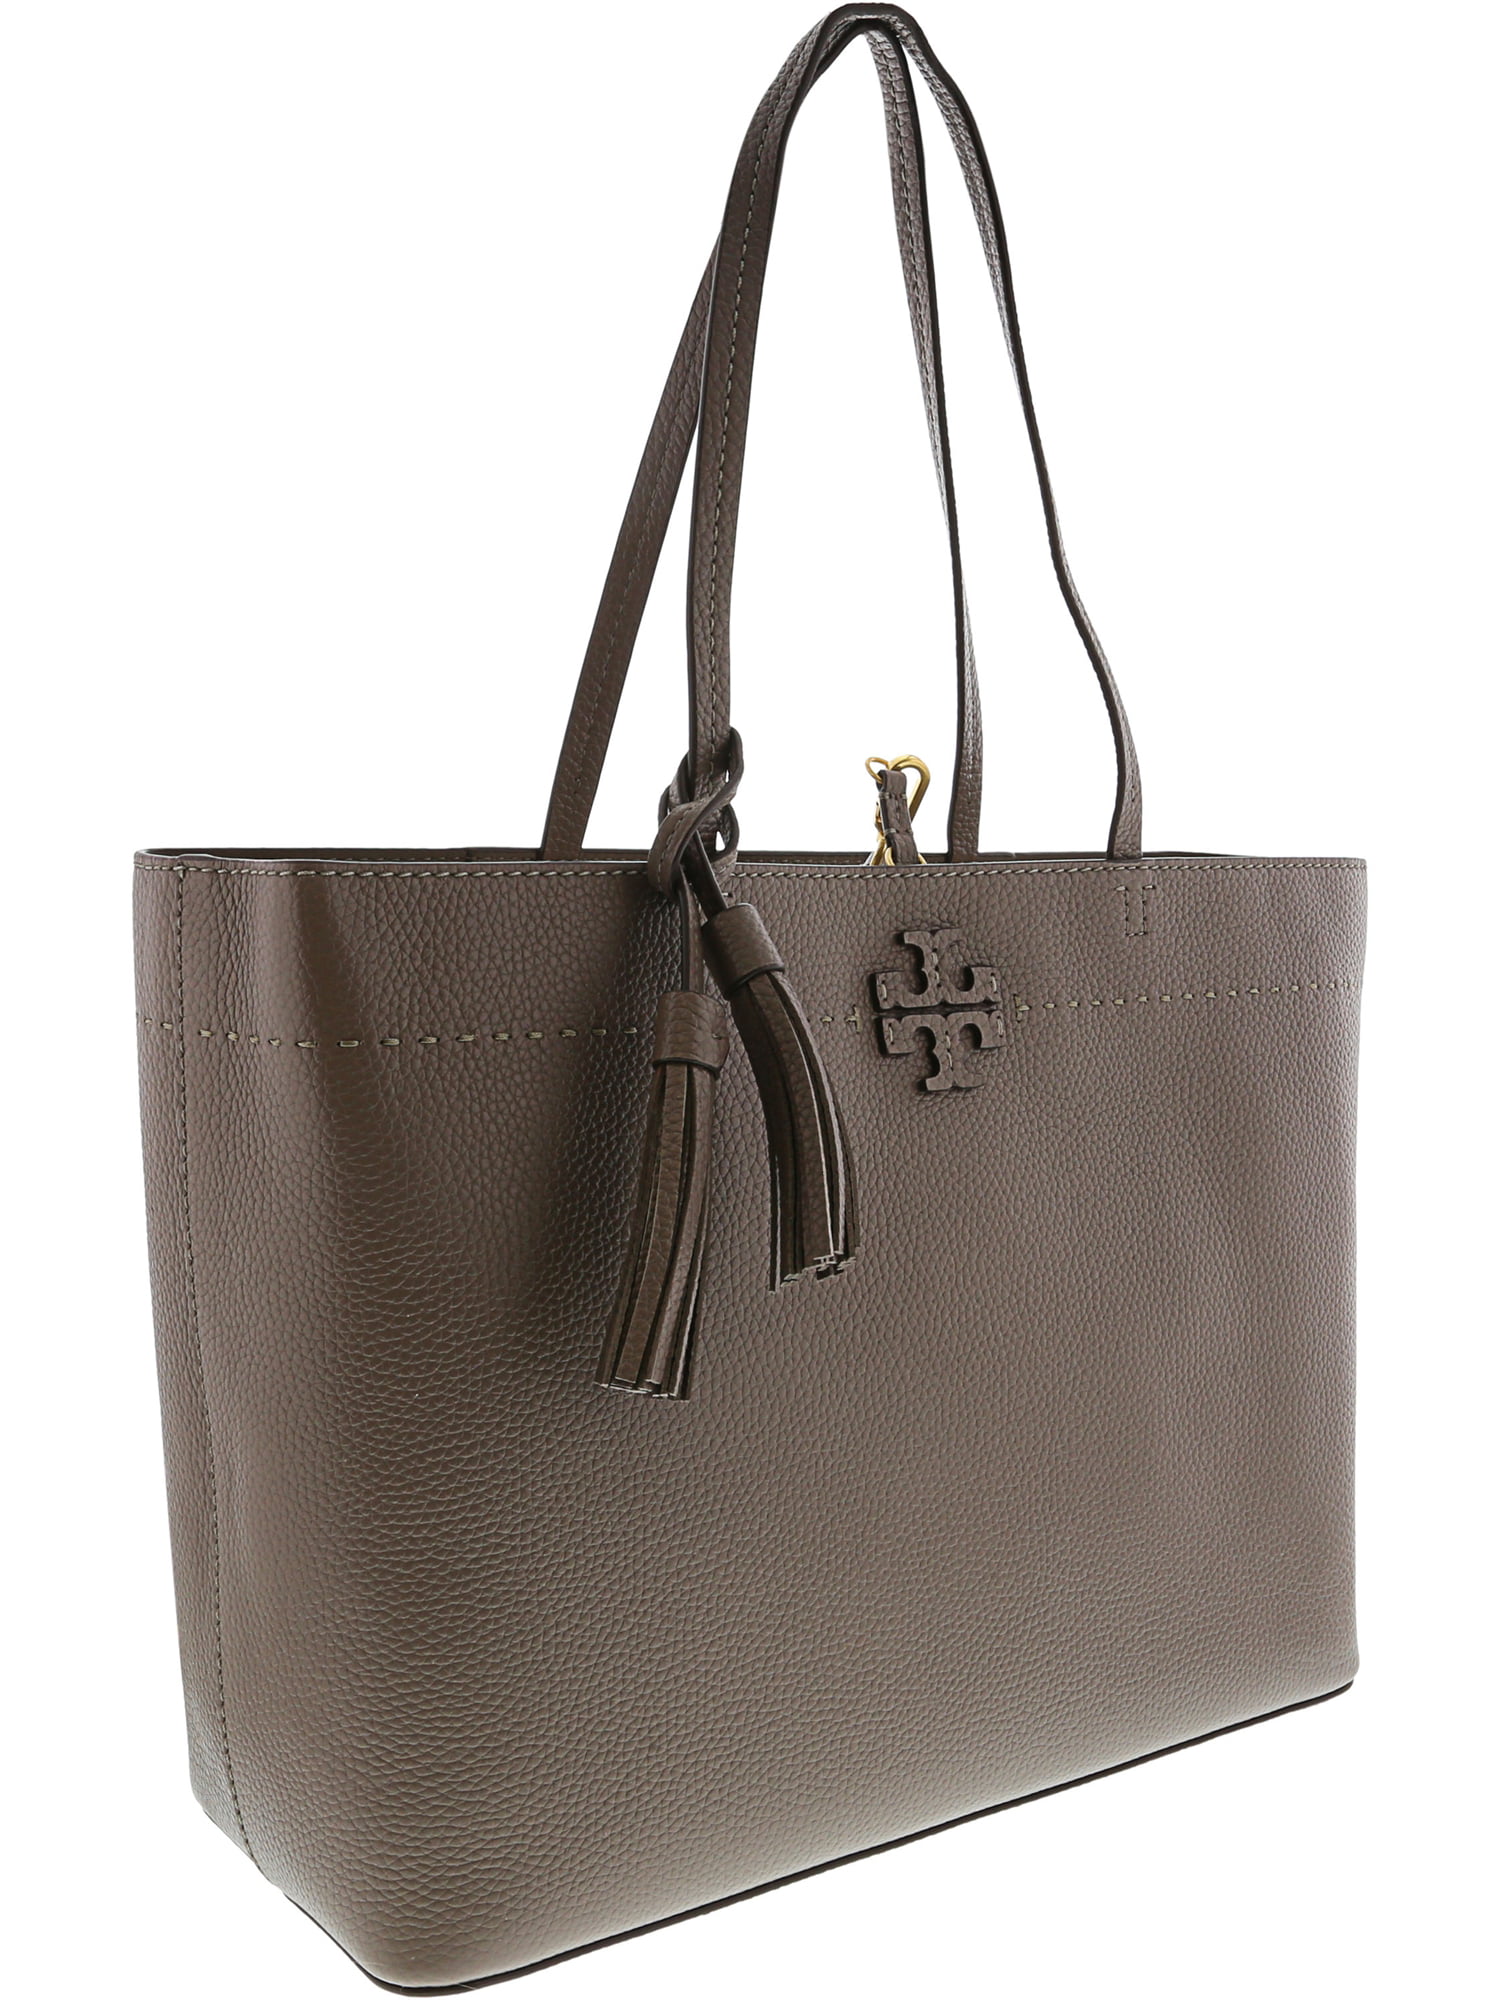 Tory Burch Women's Mcgraw Leather Top-Handle Bag Tote - Silver Maple -  